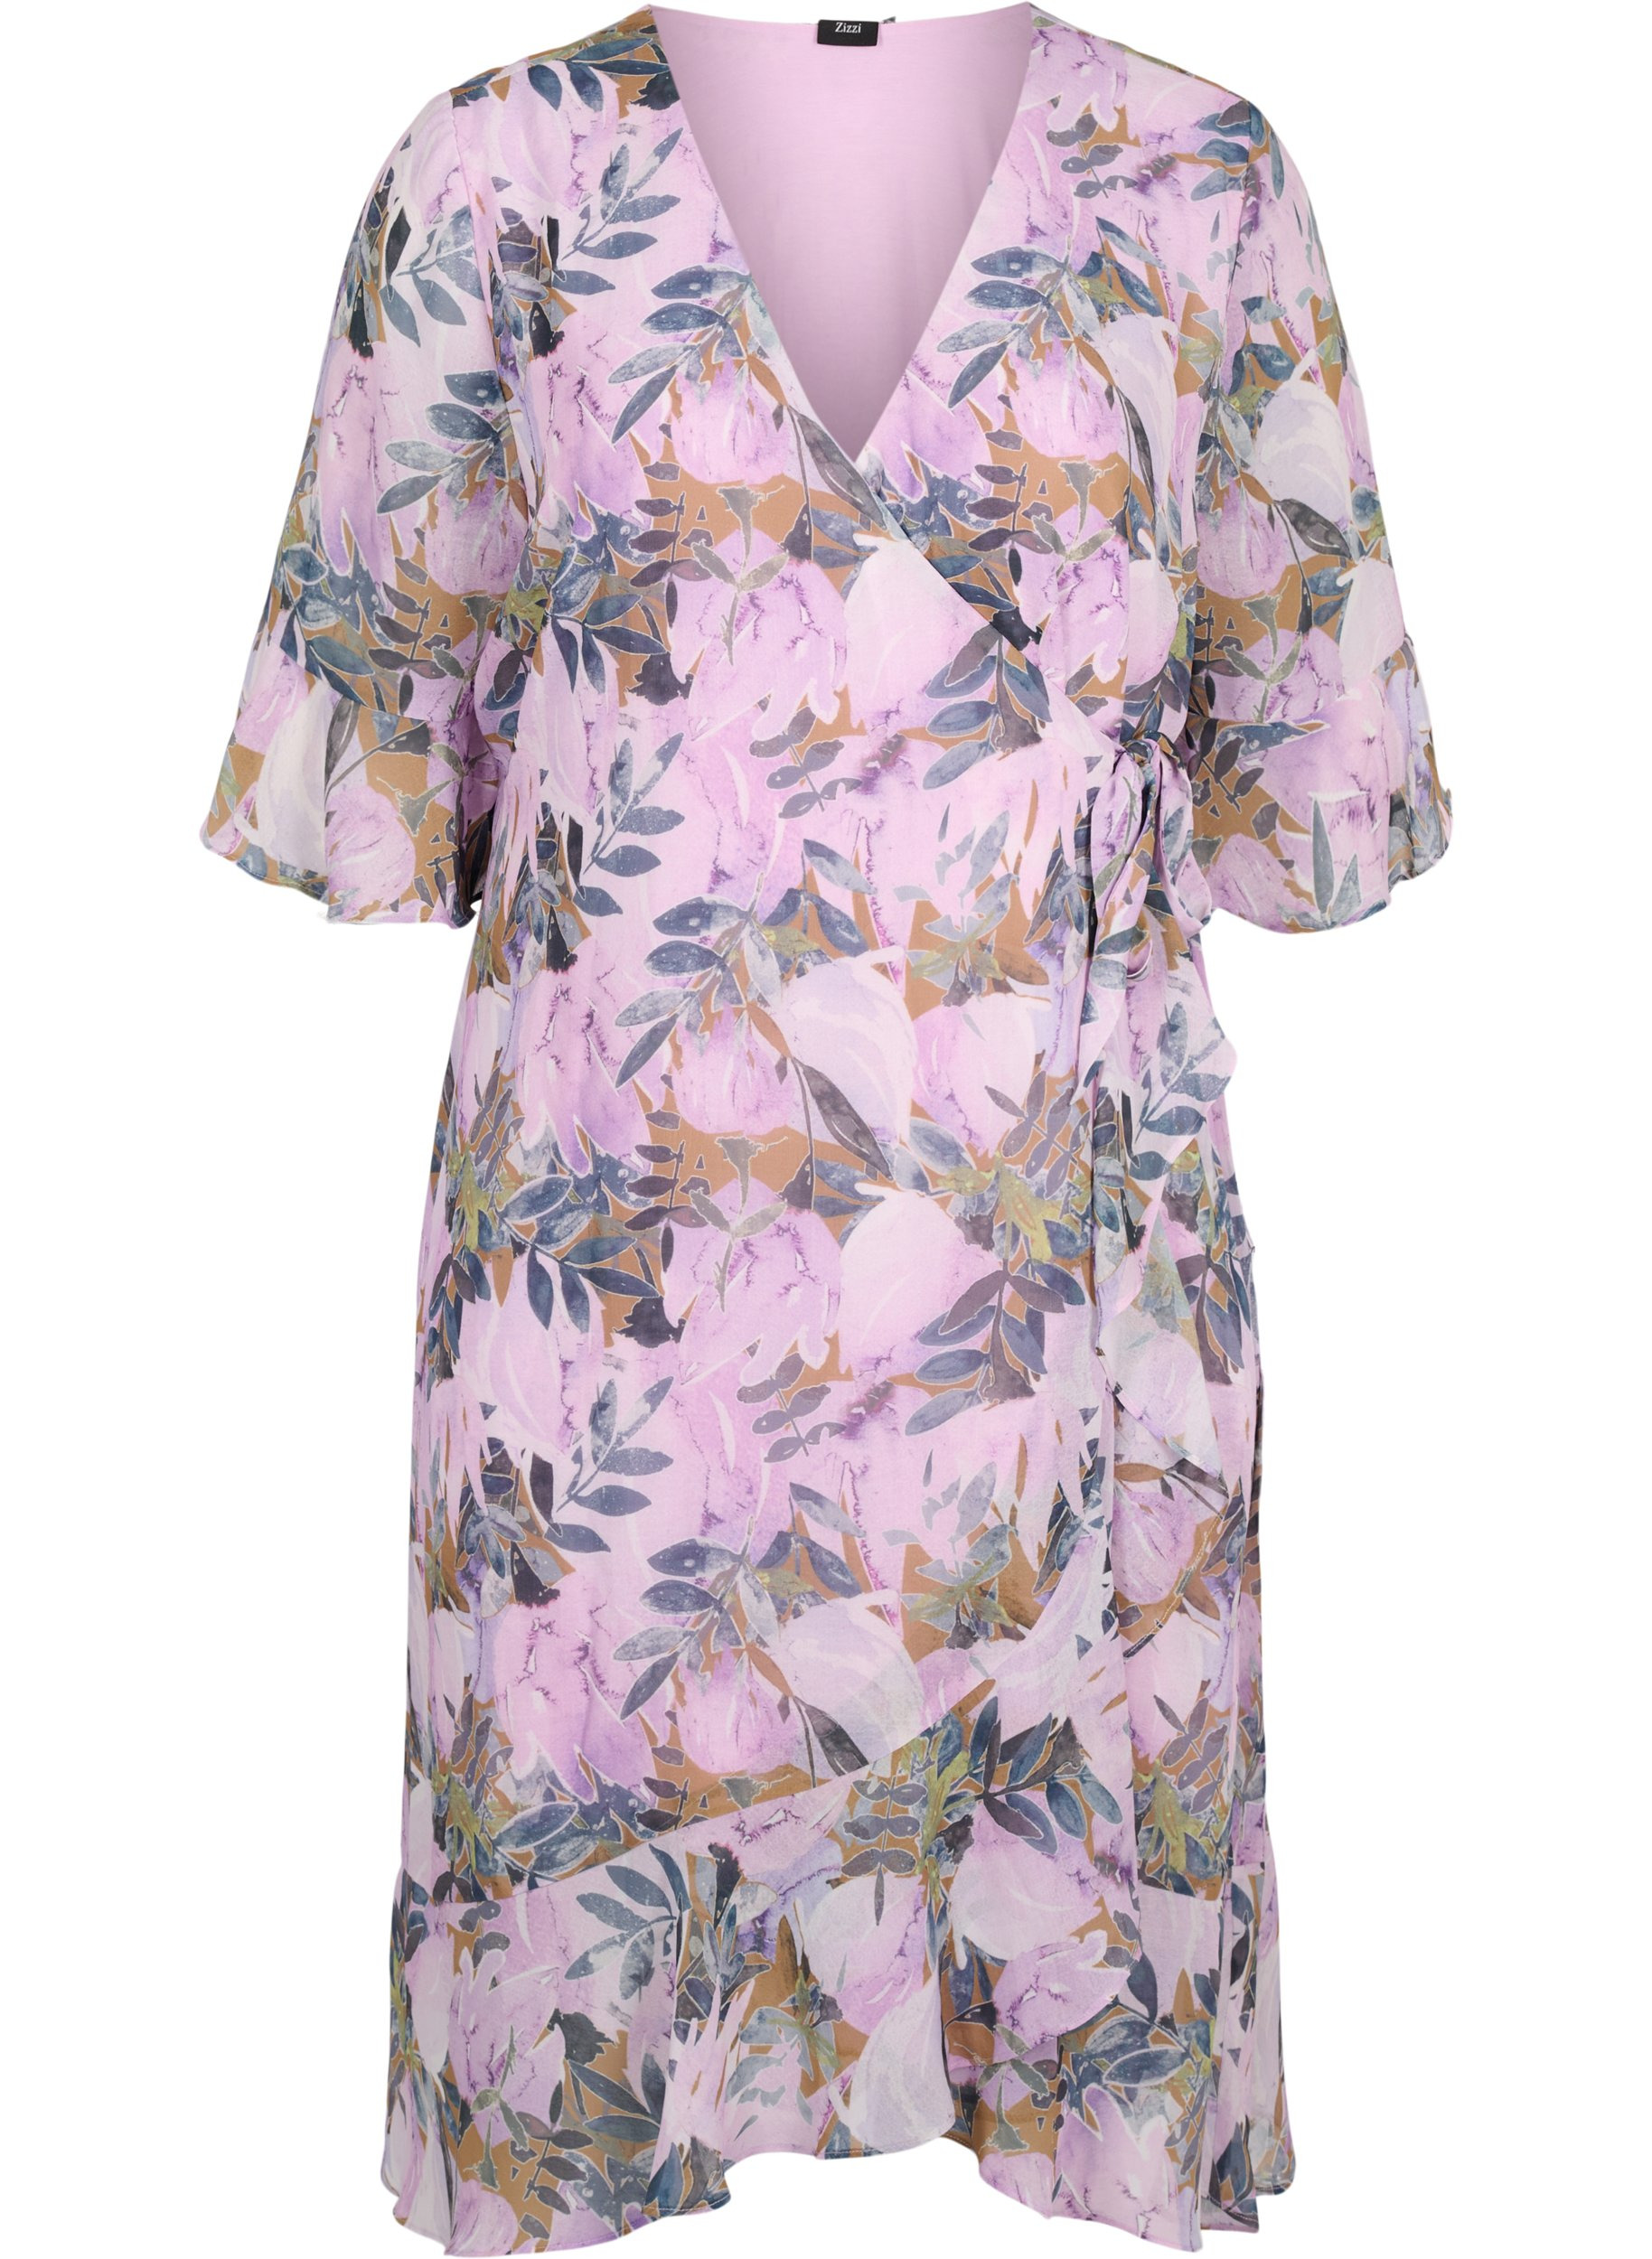 Floral wrap dress with 3/4-length ...